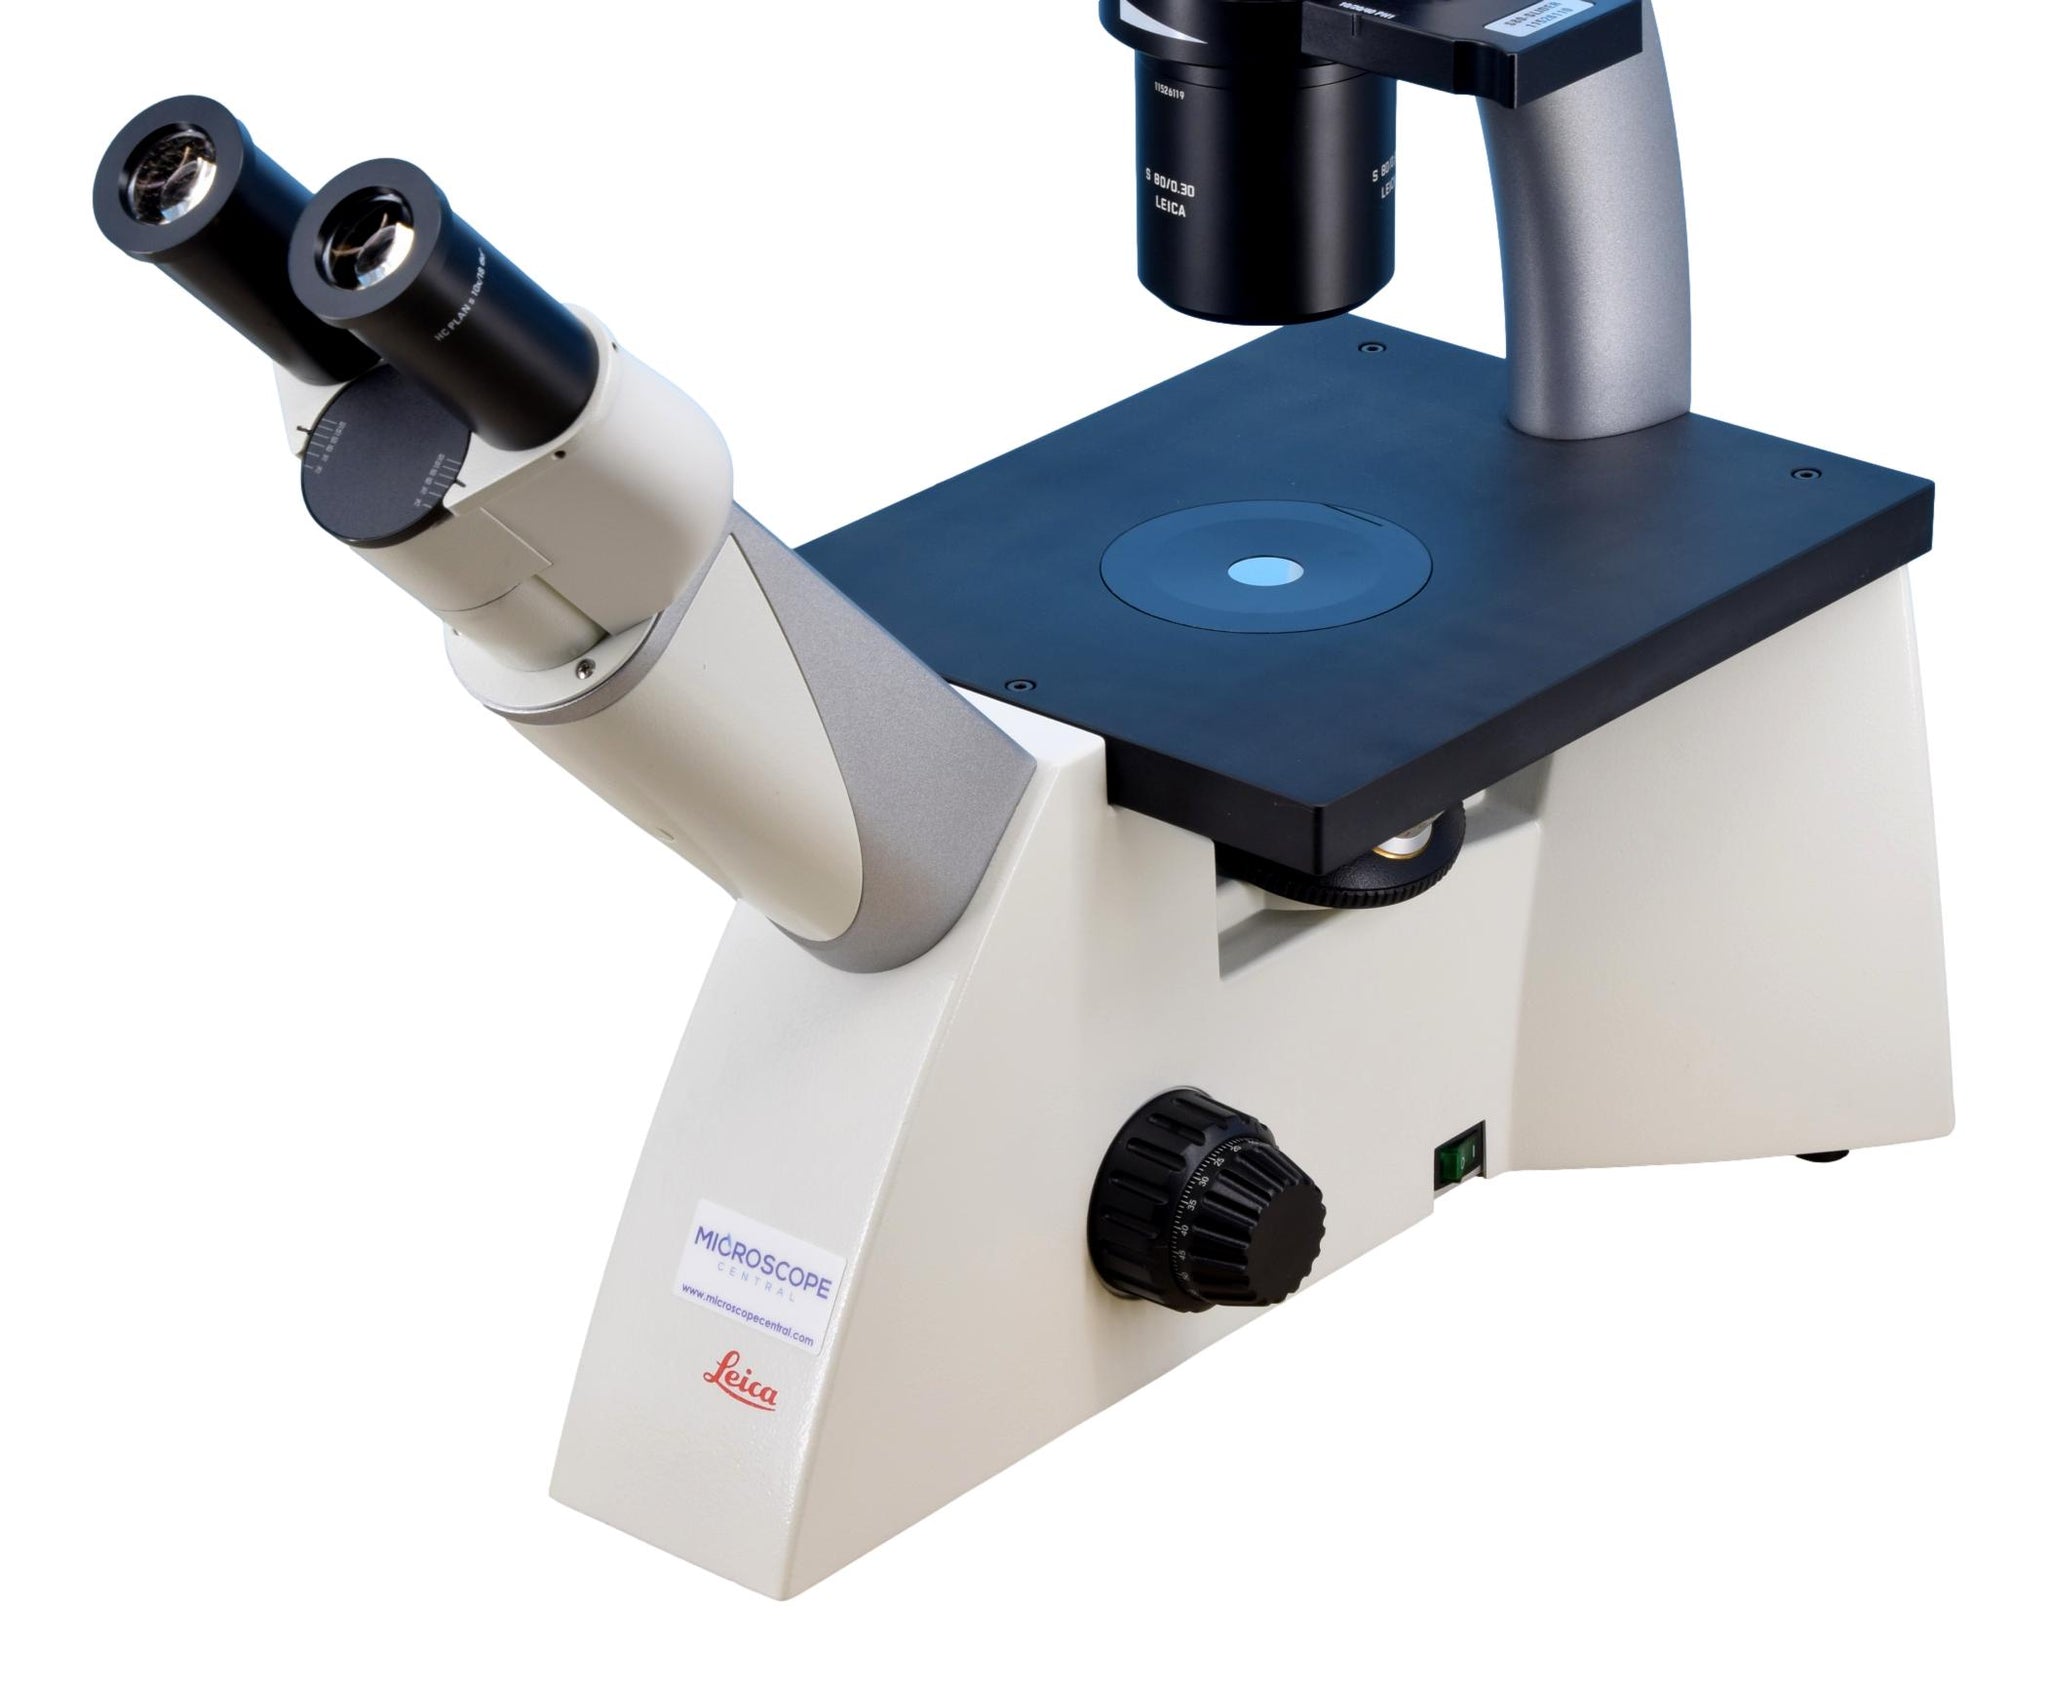 Leica DMi1 Inverted Phase Contrast Tissue Culture Microscope - Refurbished